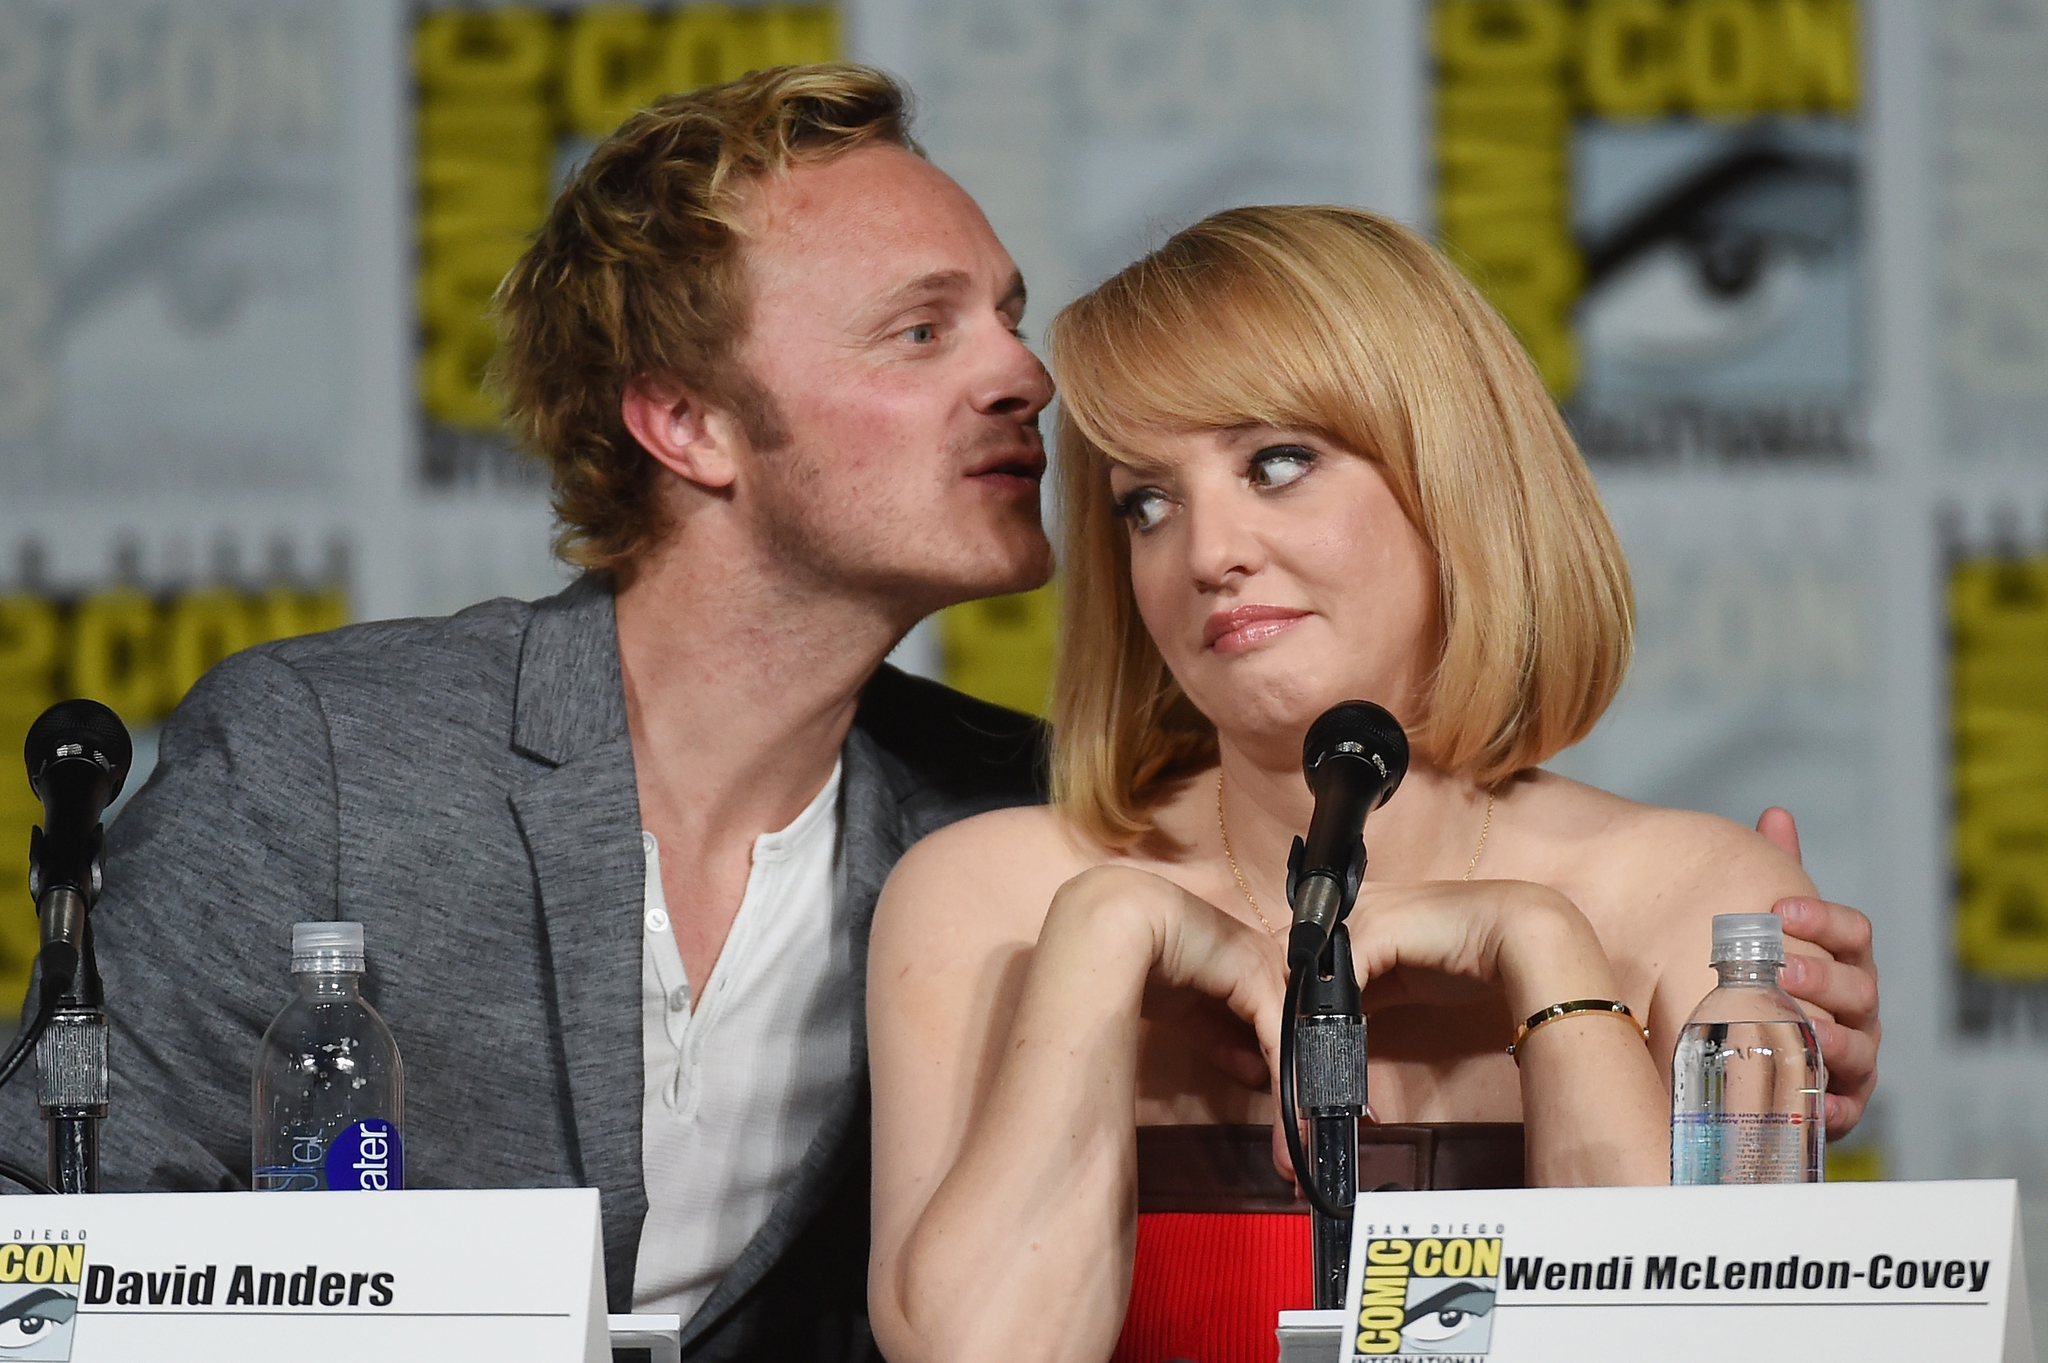 Wendi McLendon-Covey and David Anders